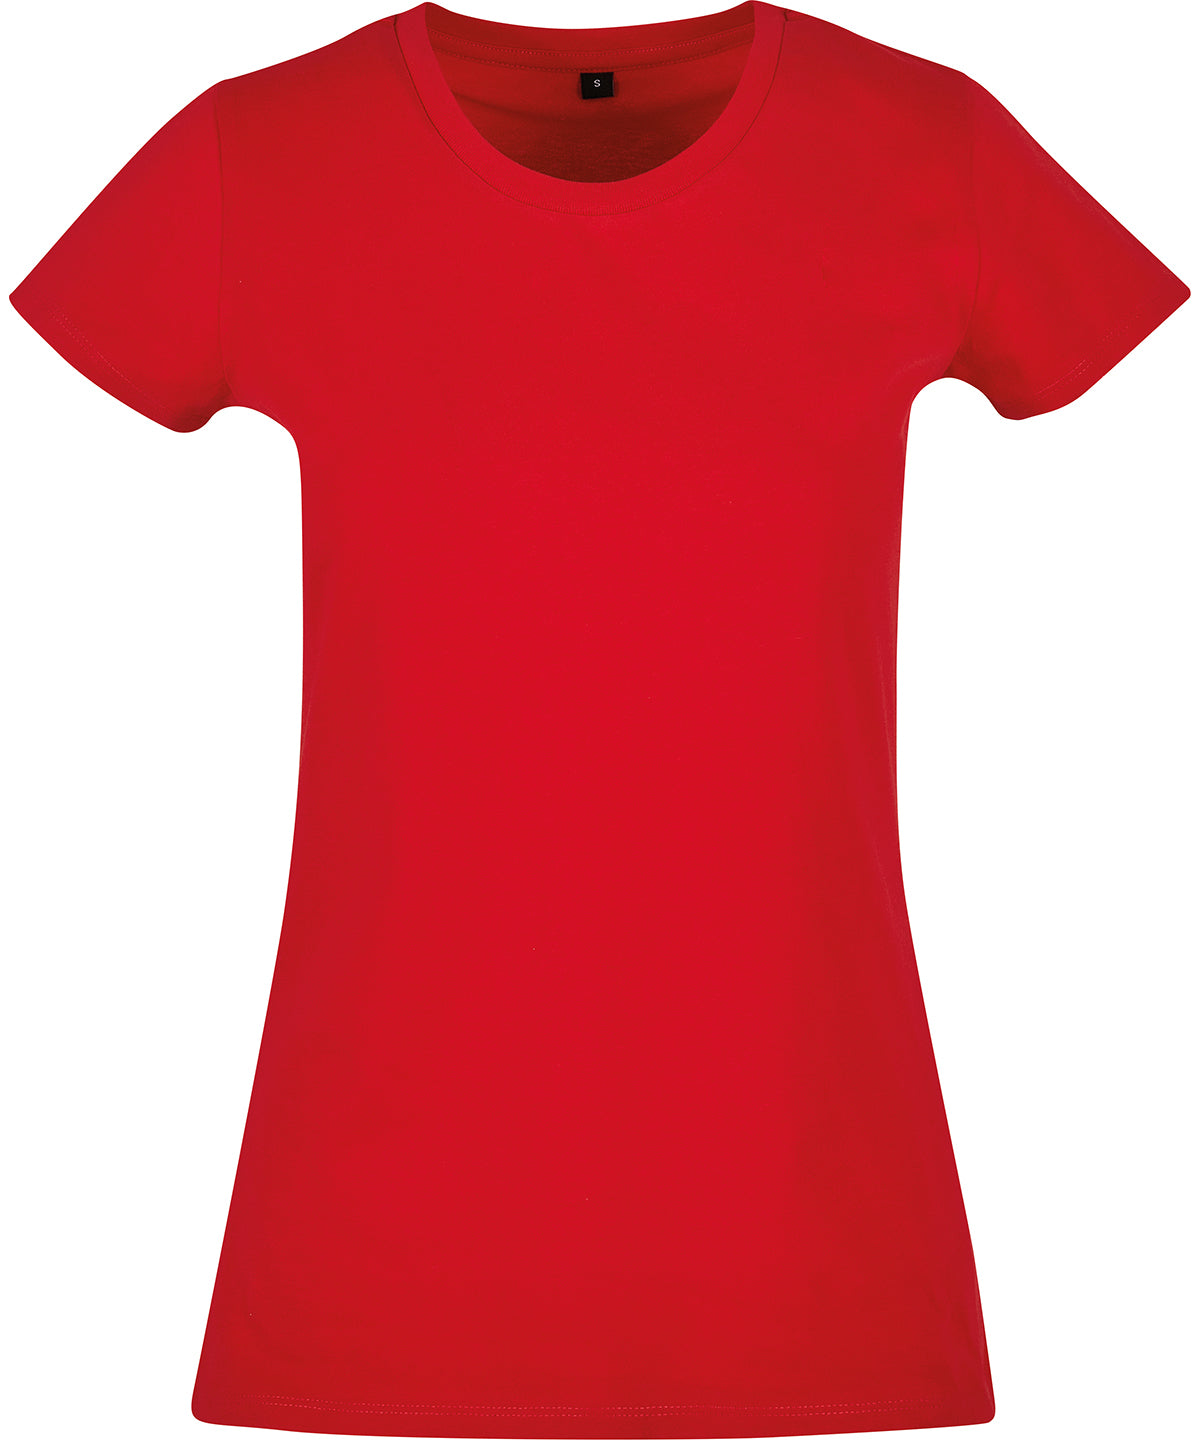 Build Your Brand Basic Womens Basic Tee City Red